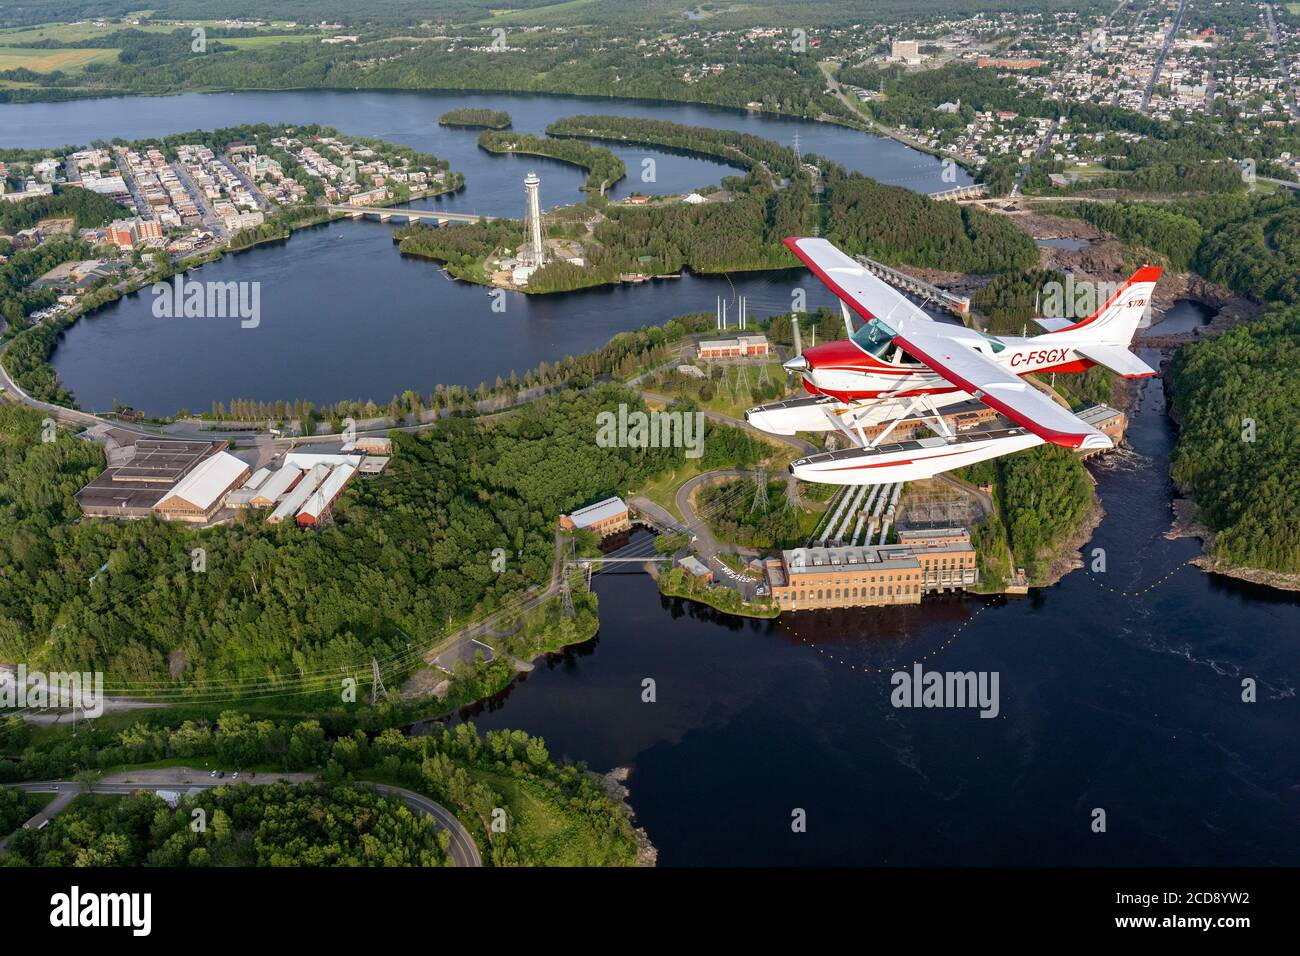 Canada, Province of Quebec, Mauricie region, Hydravion Aventure, Cessna 206 flight, overflight of the Cit? de l'Energie and the Shawinigan hydroelectric power station on the Saint-Maurice River Stock Photo